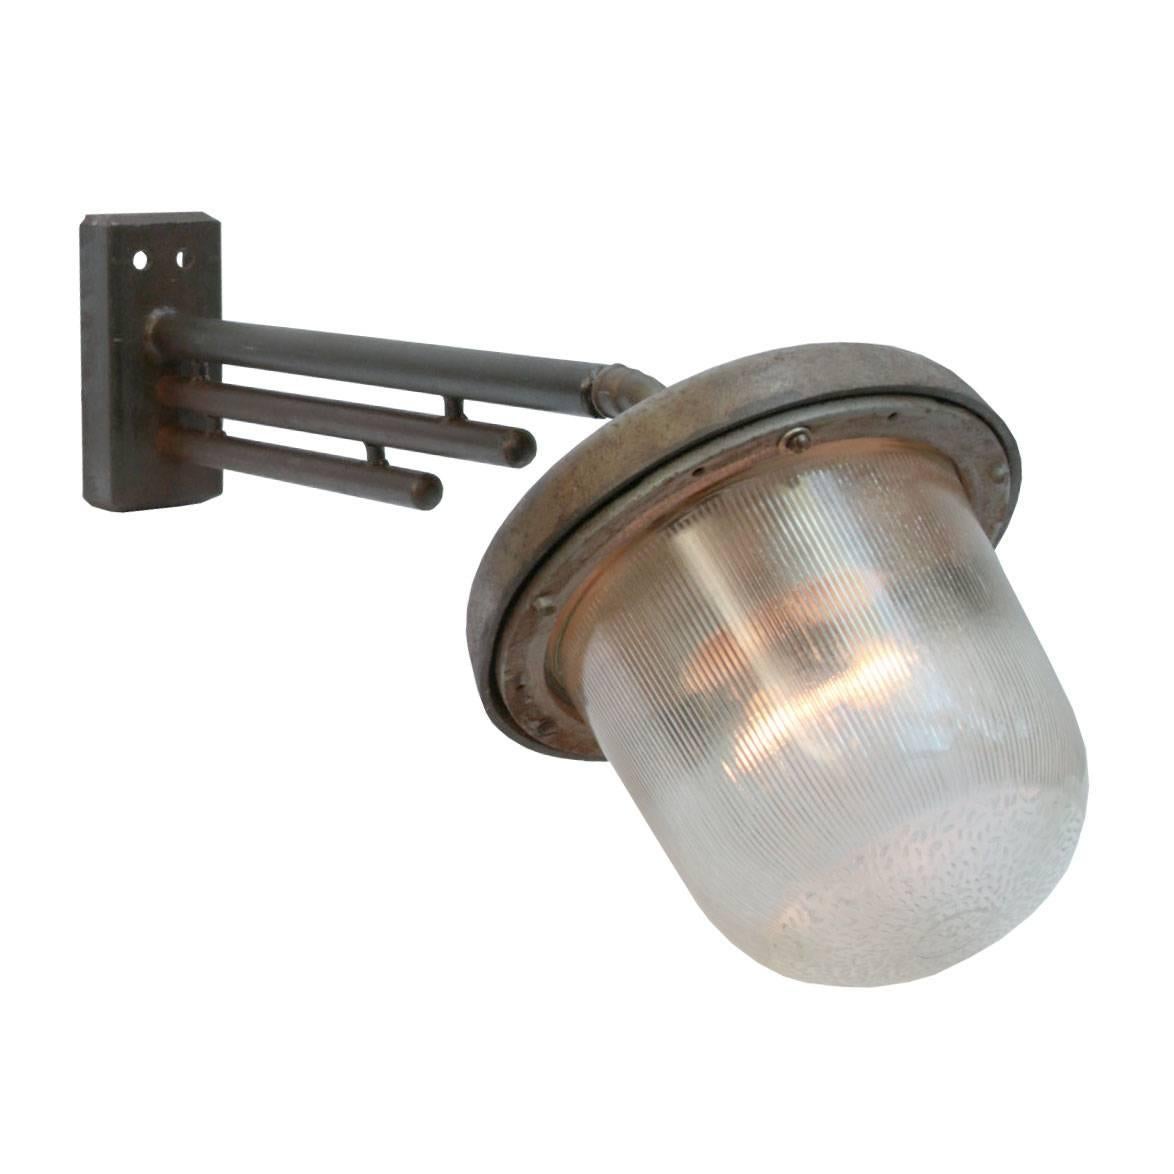 Large Industrial wall light. Cast iron arm with Holophane glass. Size wall mount: width 8 cm, height 19 cm. 2 holes to secure. Max. 150W E27 or E26.

All lamps have been made suitable by international standards for incandescent light bulbs,